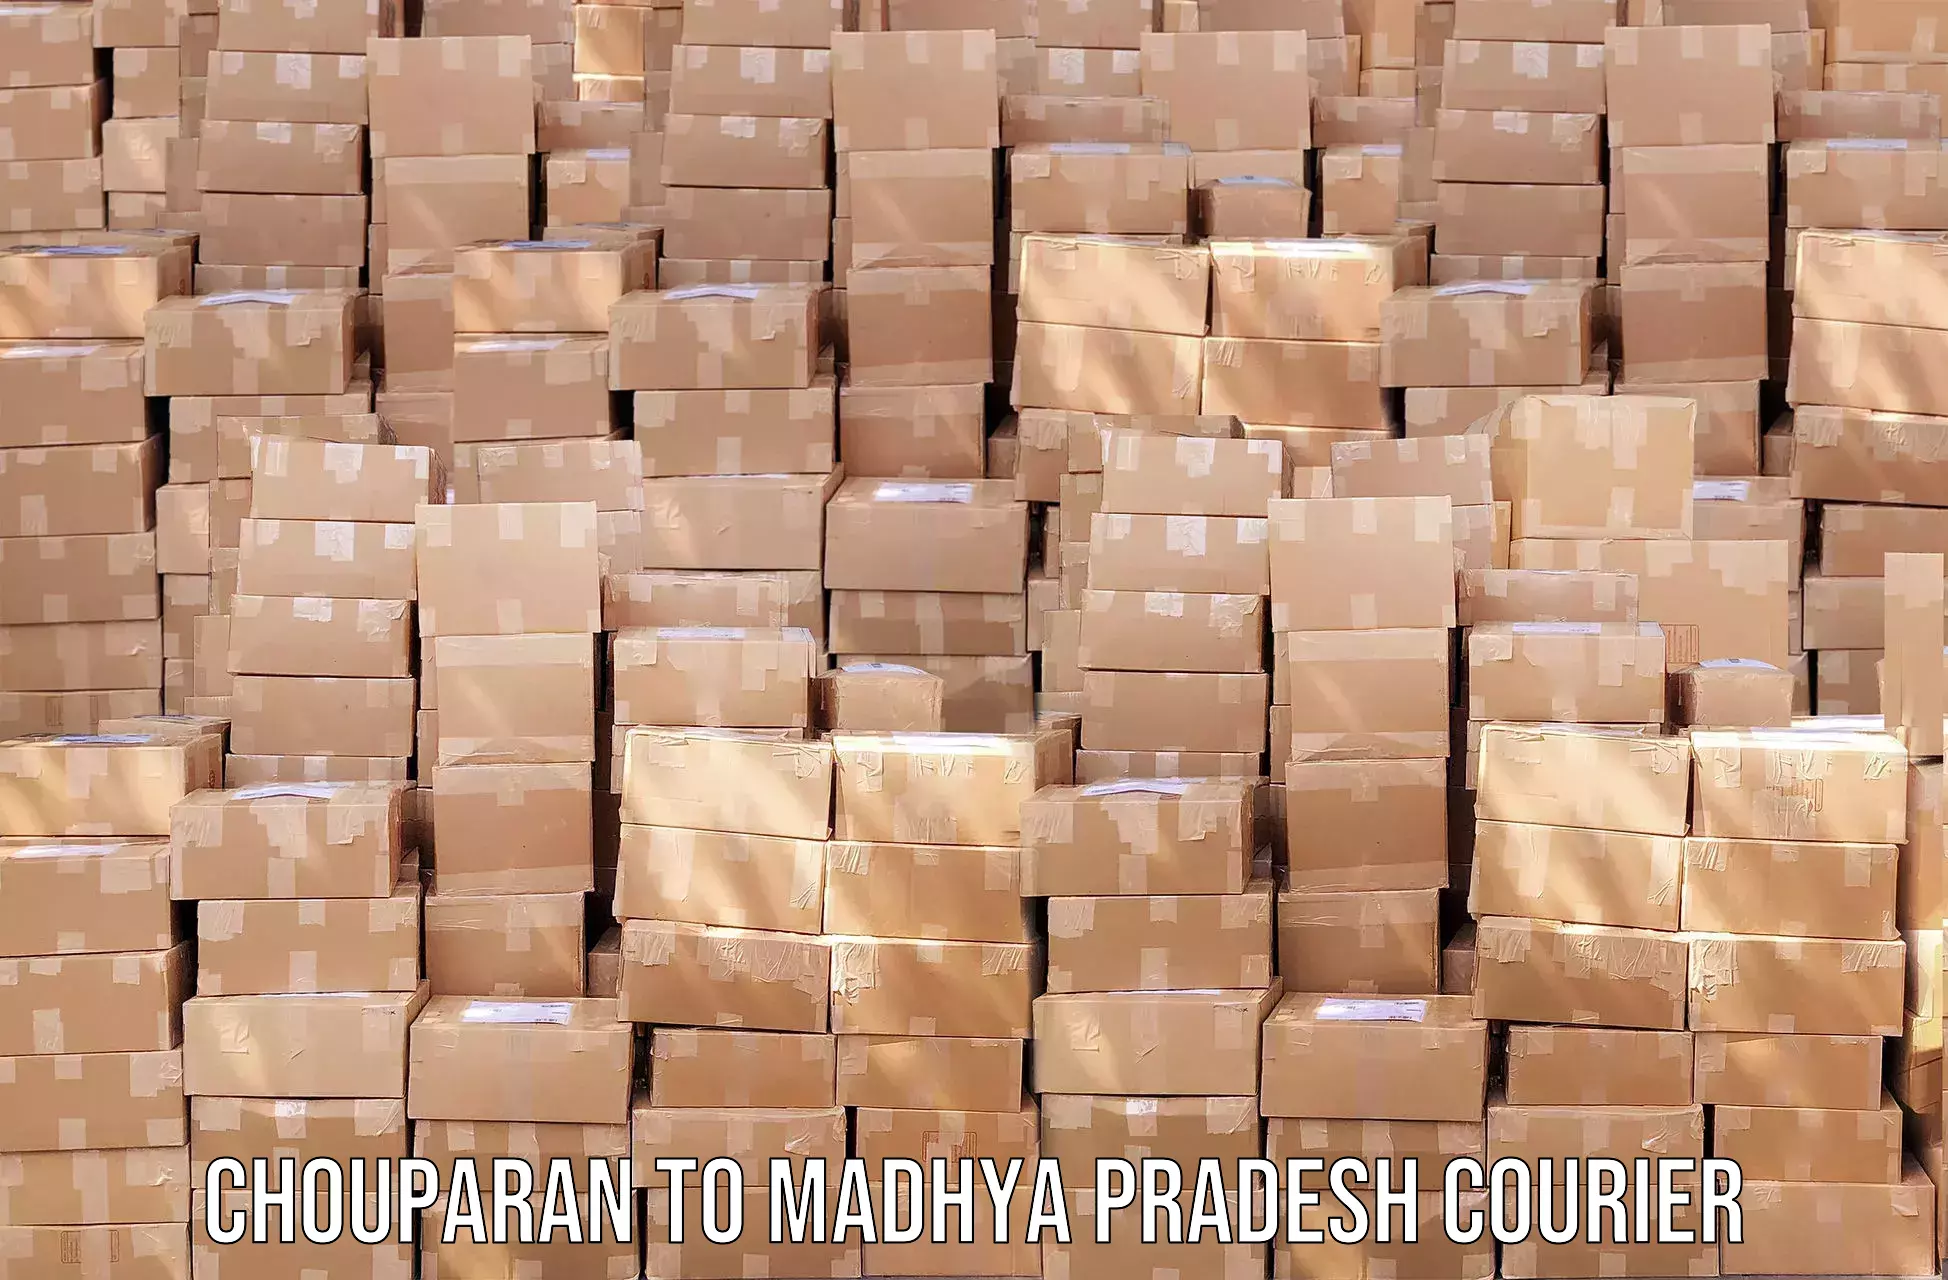 Package delivery network Chouparan to Madhya Pradesh